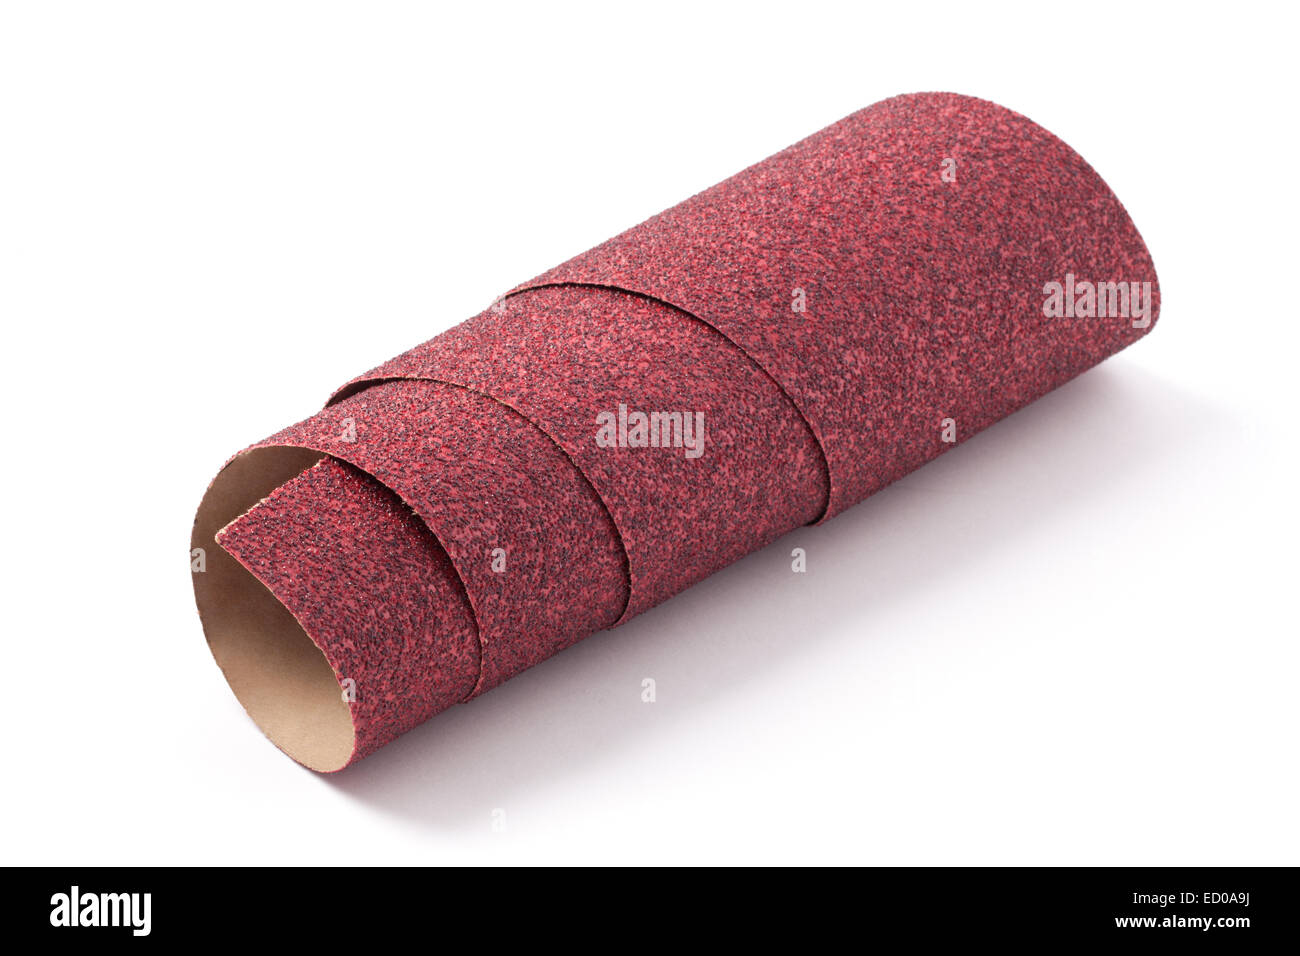 Roll of coarse sandpaper isolated on white background. Stock Photo